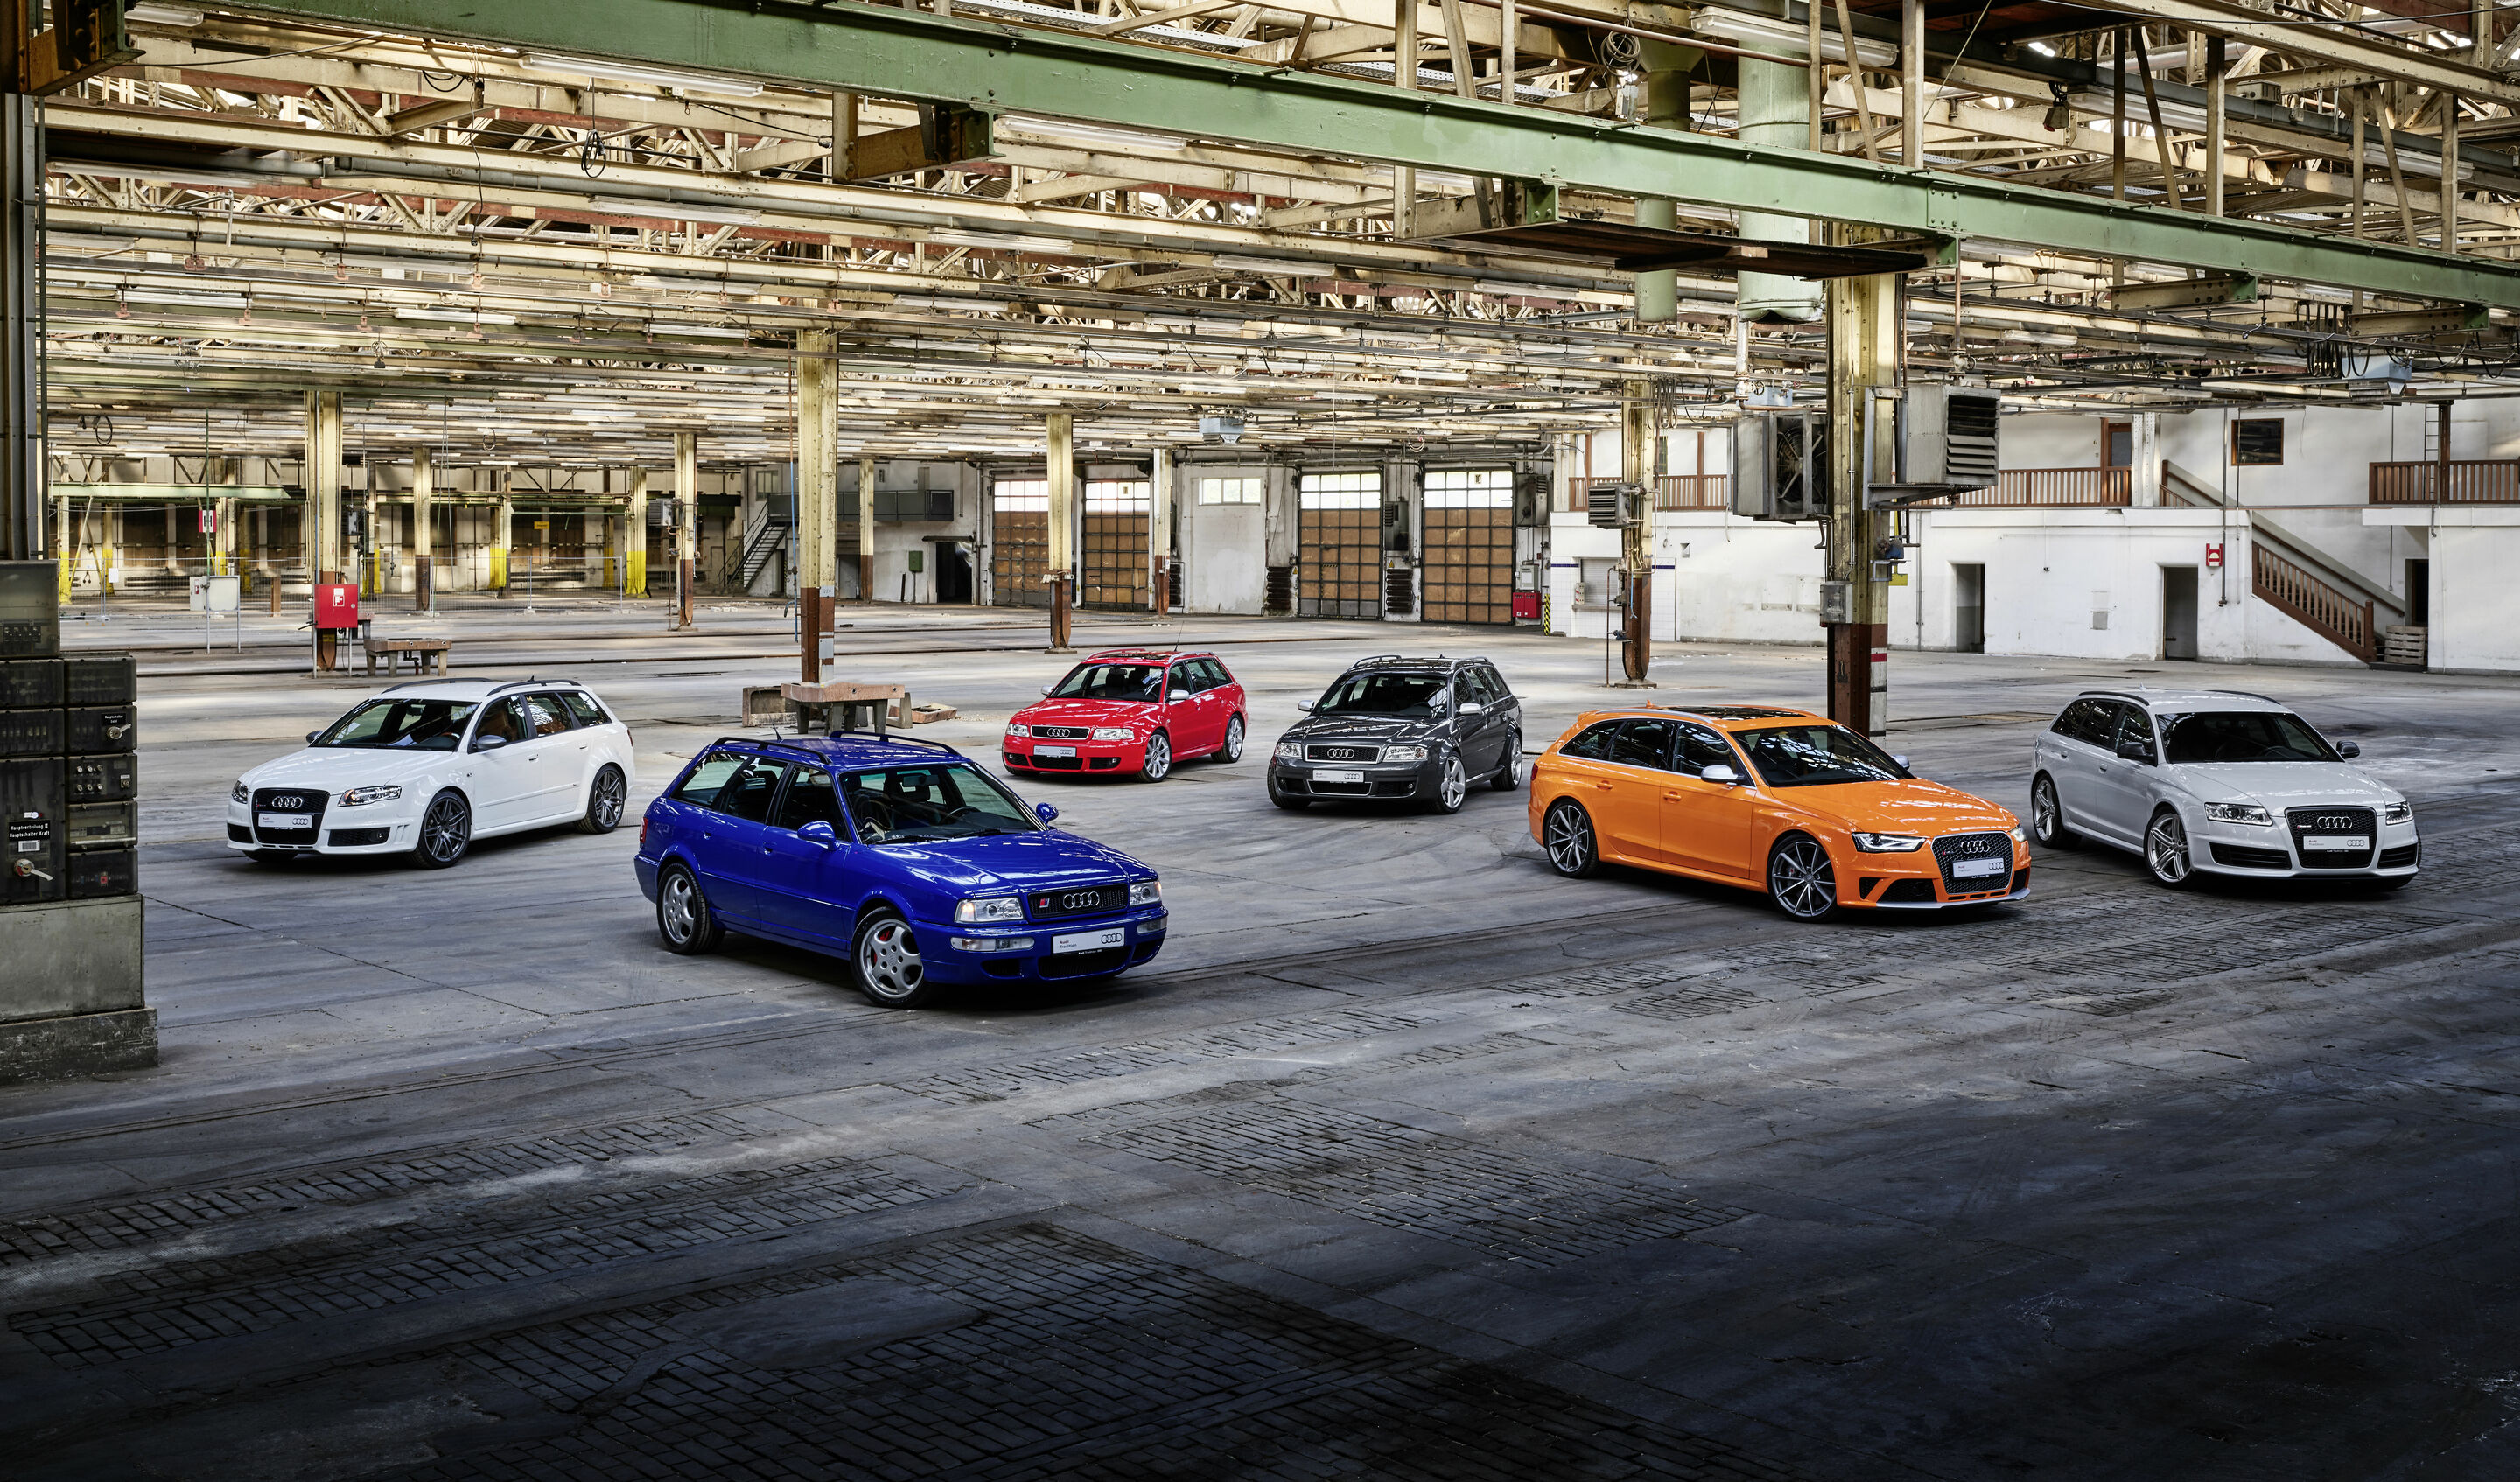 High-Performance. Full of Character. Individual. Audi Sport Is Celebrating 25 years of the Audi RS Models